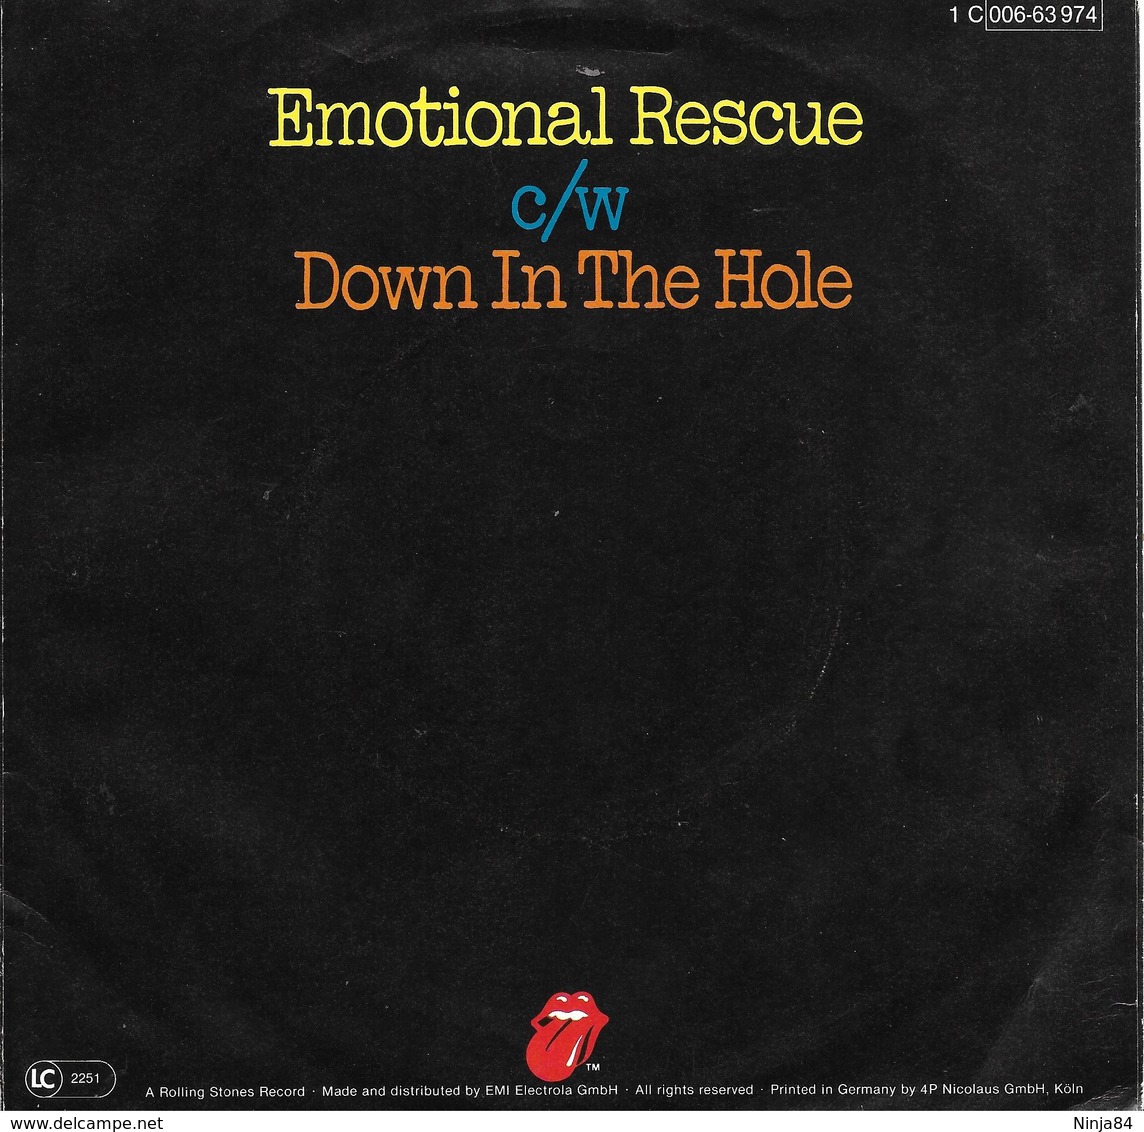 SP 45 RPM (7")   The Rolling Stones  "  Emotional Rescue  "  Allemagne - Rock